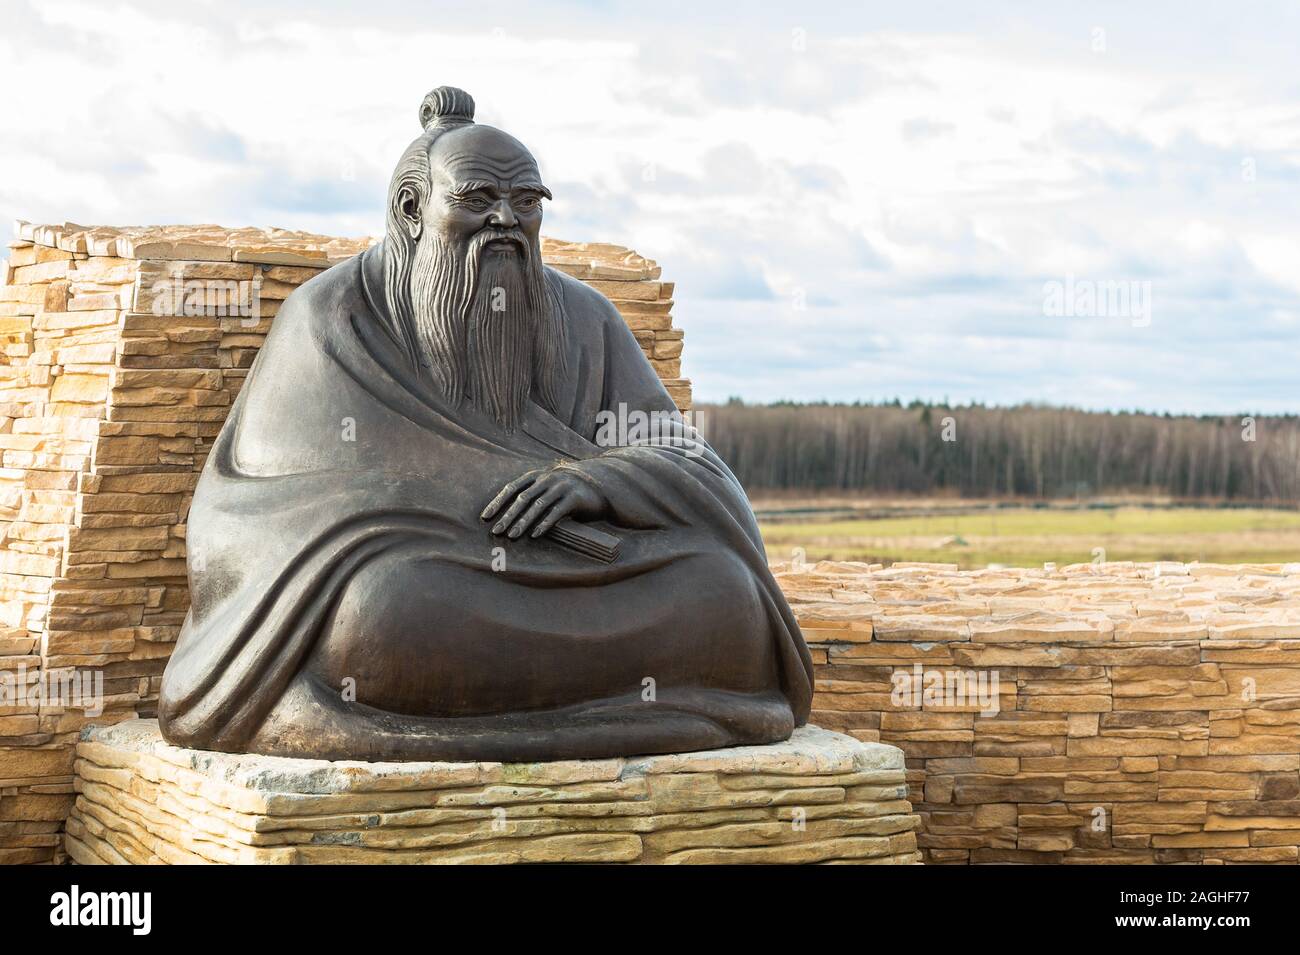 Statue of Laozi, philosopher of ancient China. Stock Photo